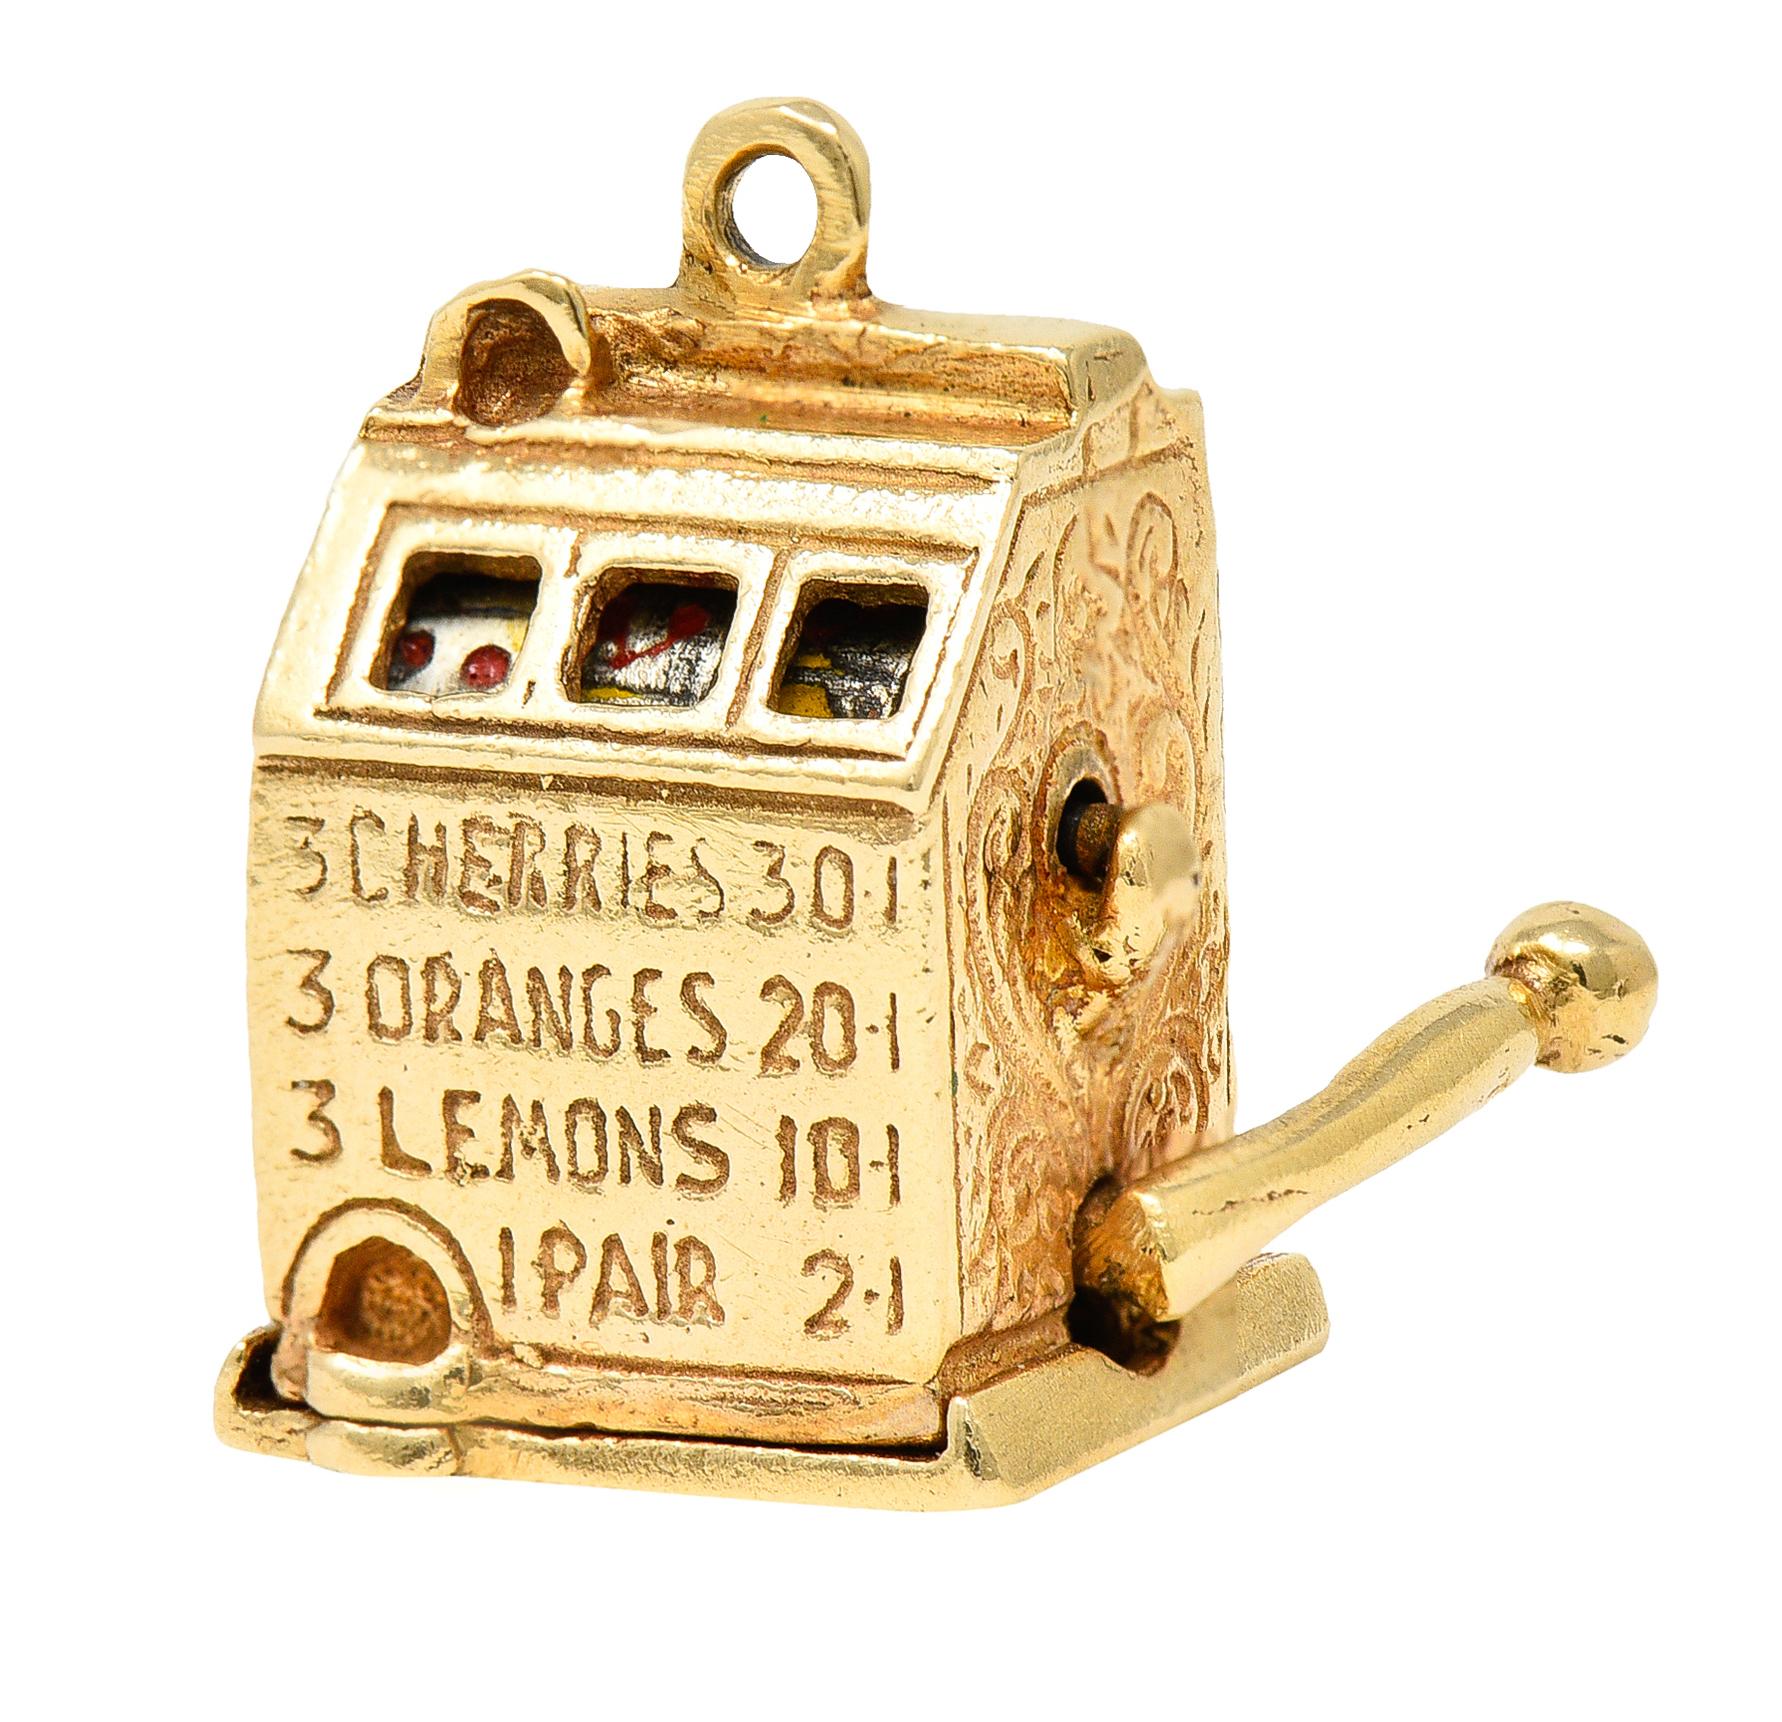 Charm is designed as a highly rendered vintage slot machine. With pierced viewing windows featuring enamel depictions of fruit - loss consistent with age and use. Functional lever to one side pivots North to South causing inner rotary to spin.